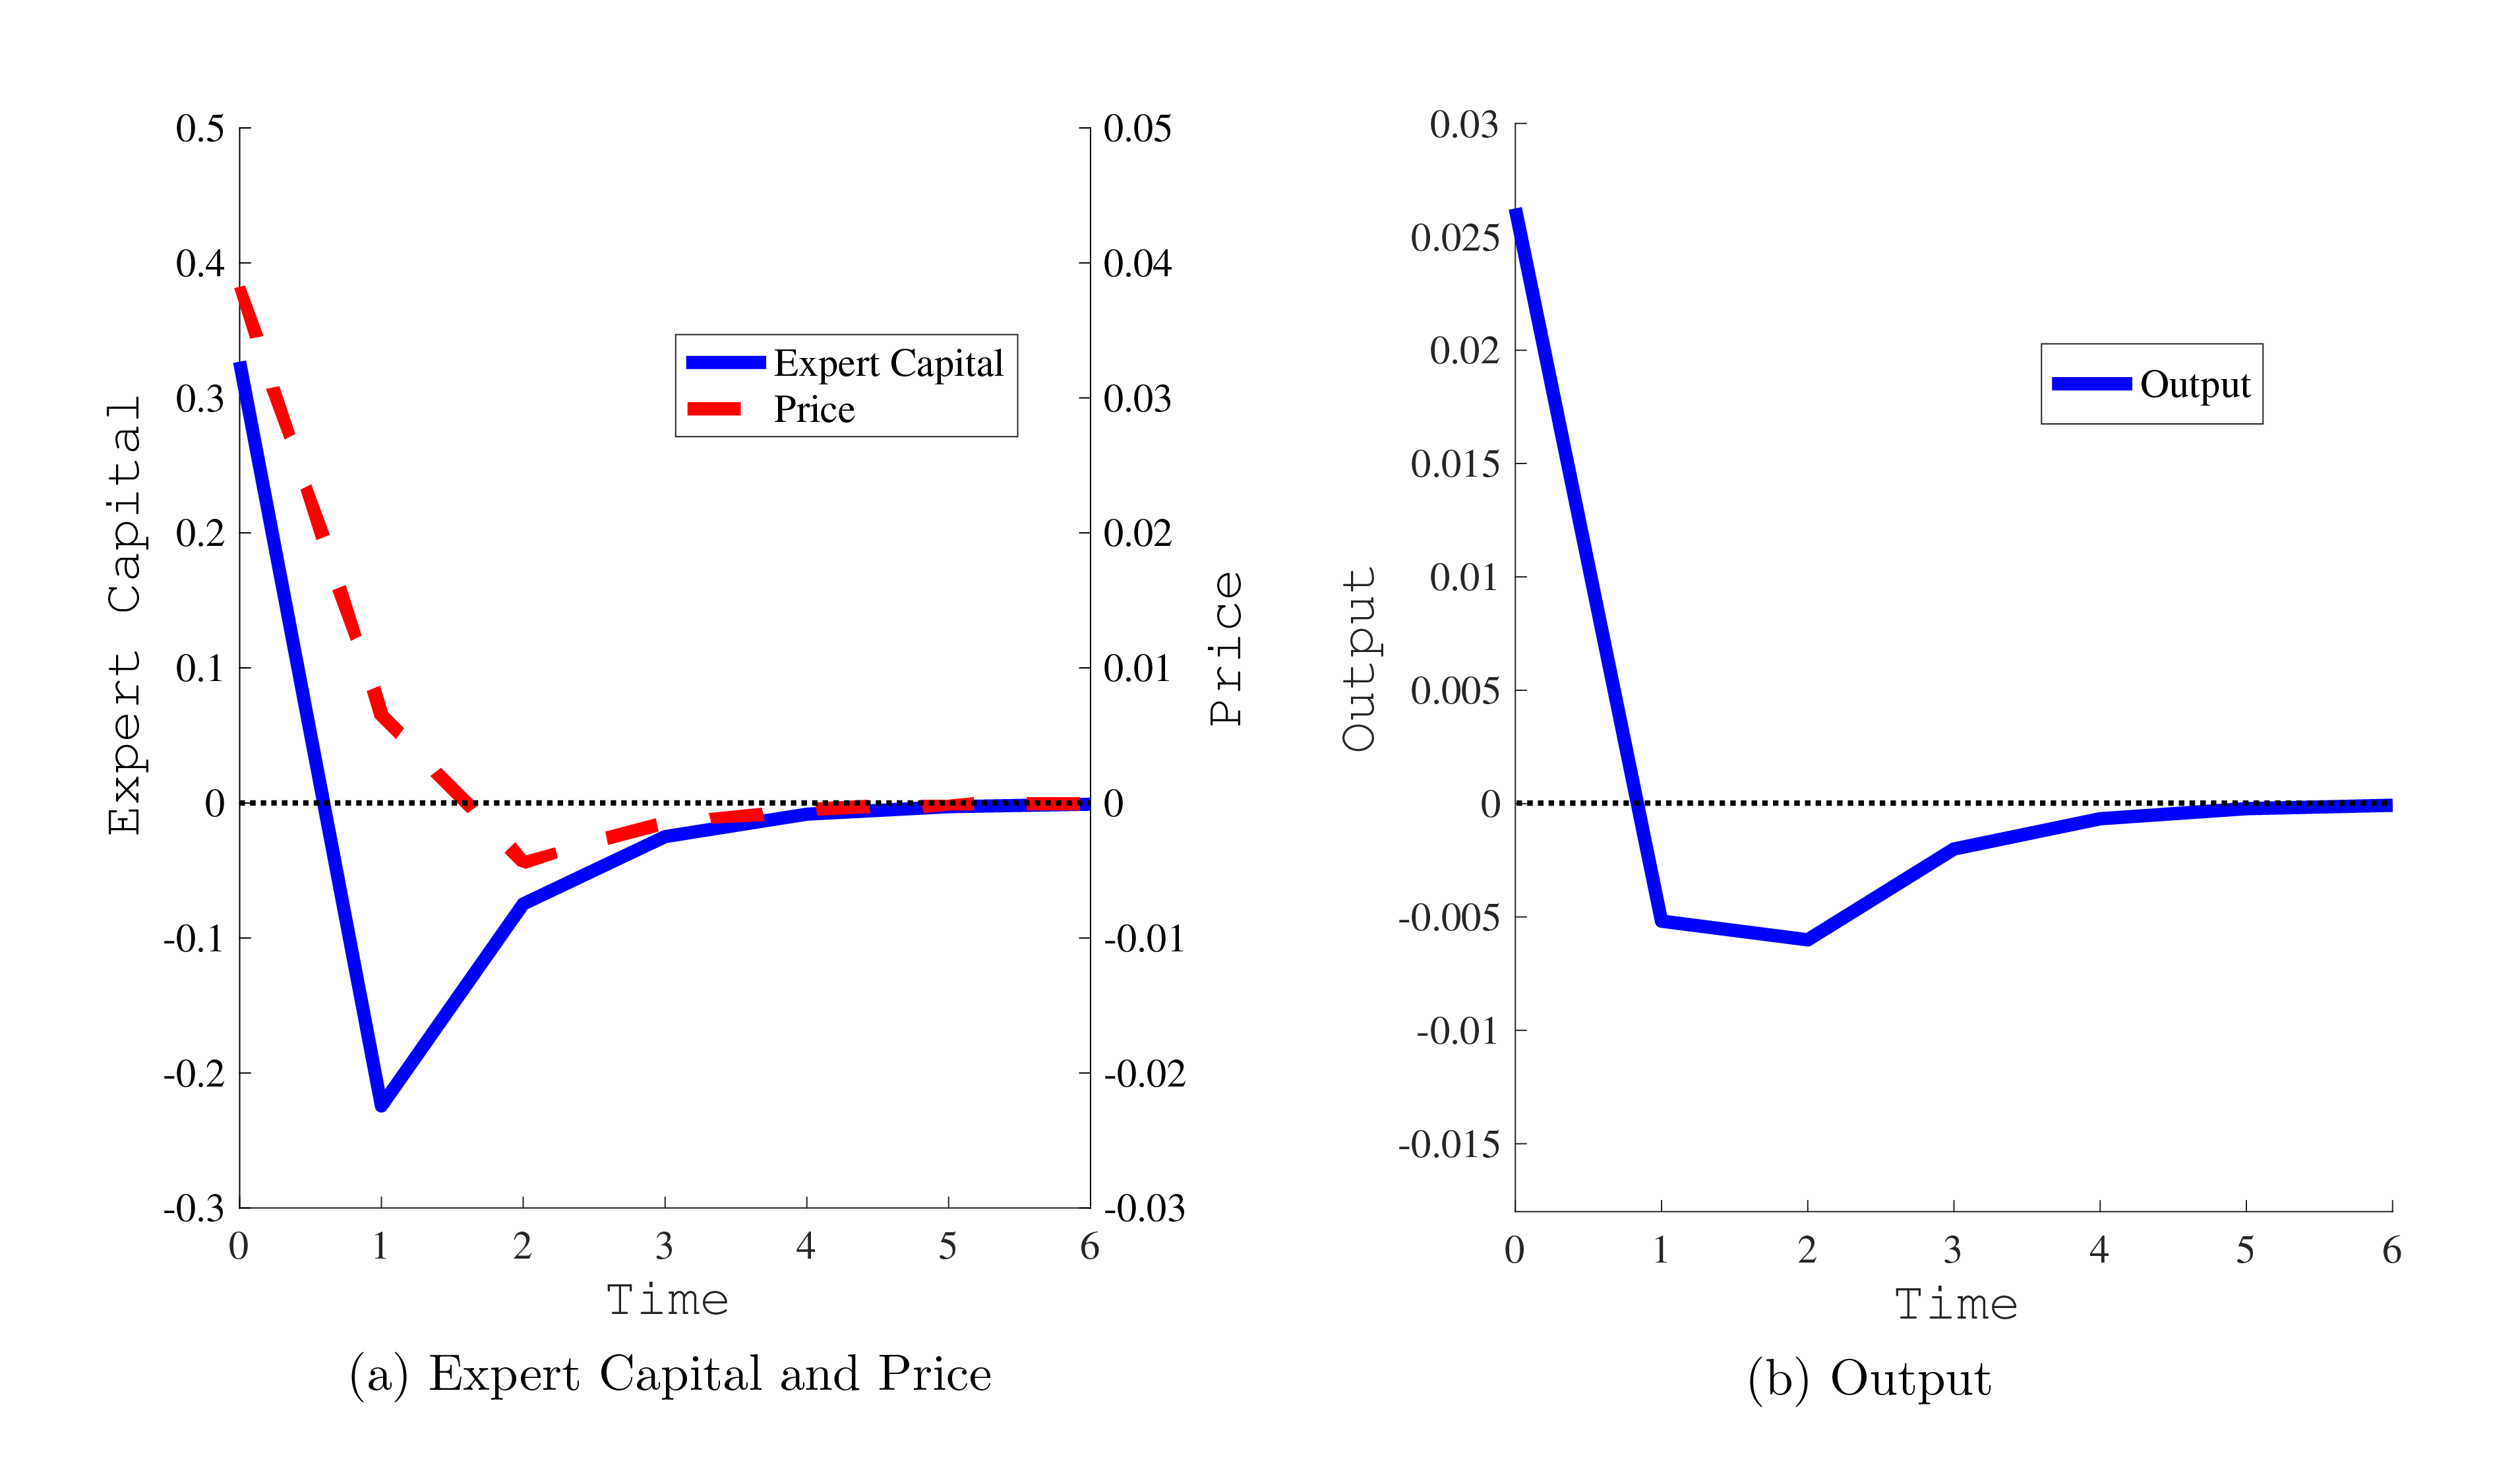 Figure 1A: capital increases initially and then falls below steady state in the next period, slowly recovering. The capital price increases above the steady state for two periods before falling below the steady state. Figure 1B: output increases above the steady state for two periods before falling below the steady